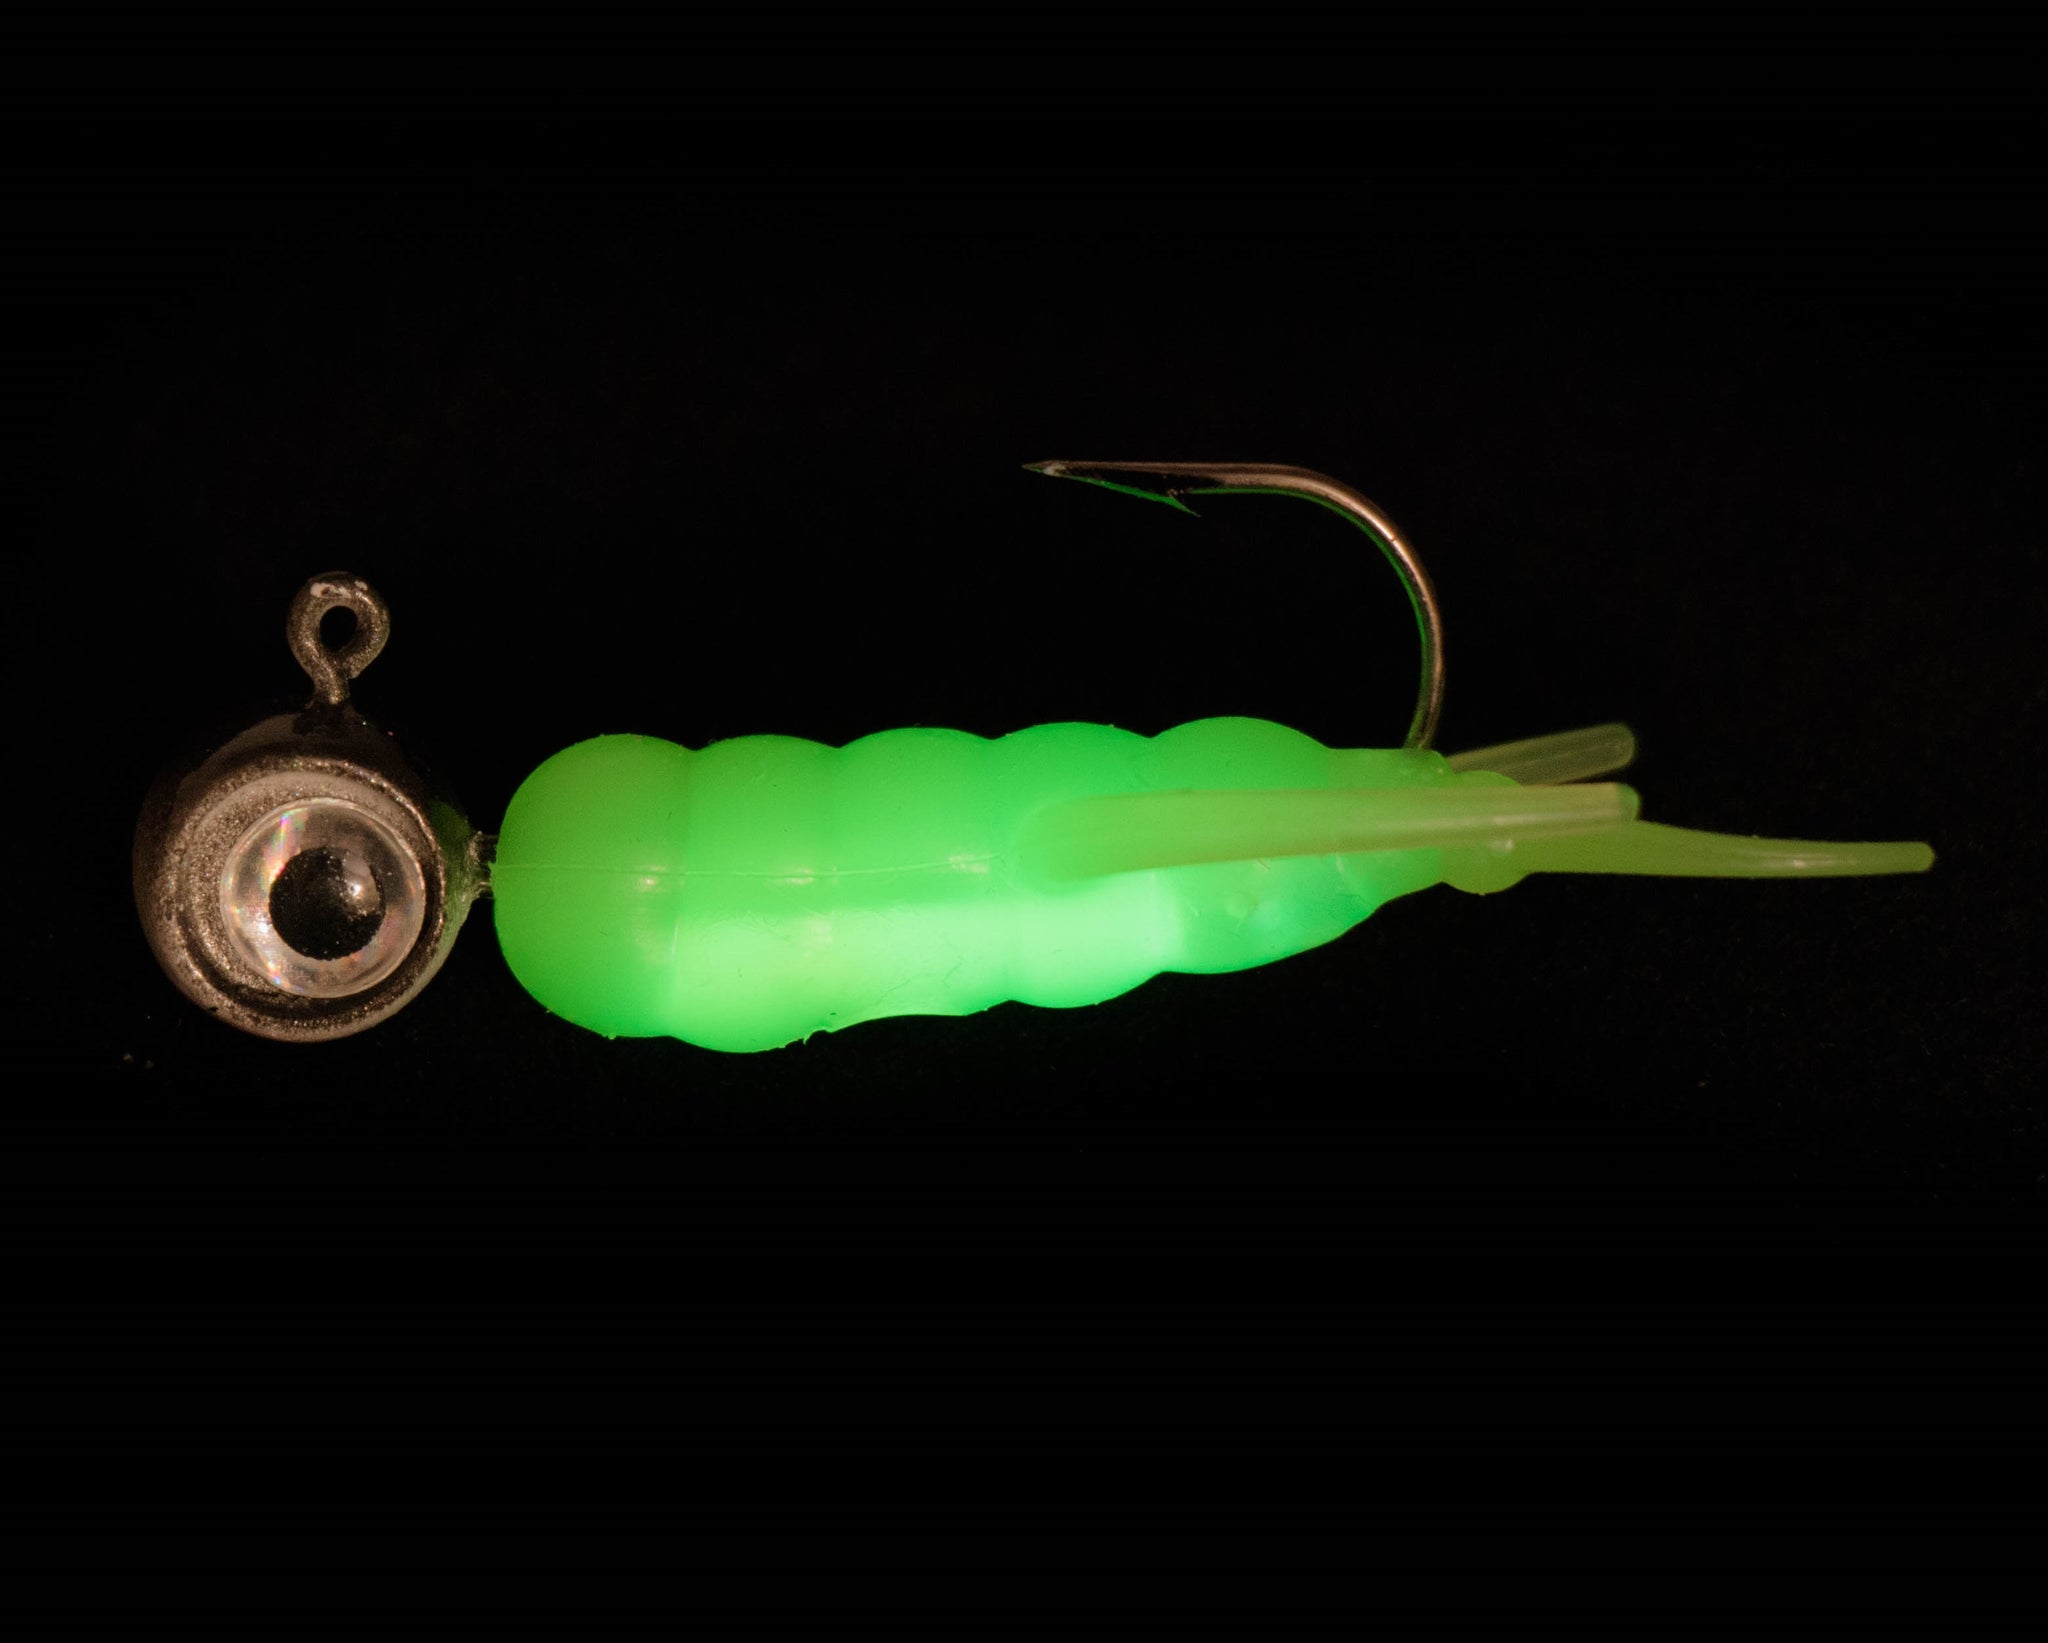 Fishing Grubs 1.5” long (4 pack) - Glows in the dark, Soft plastic, In –  Darth Water Lures